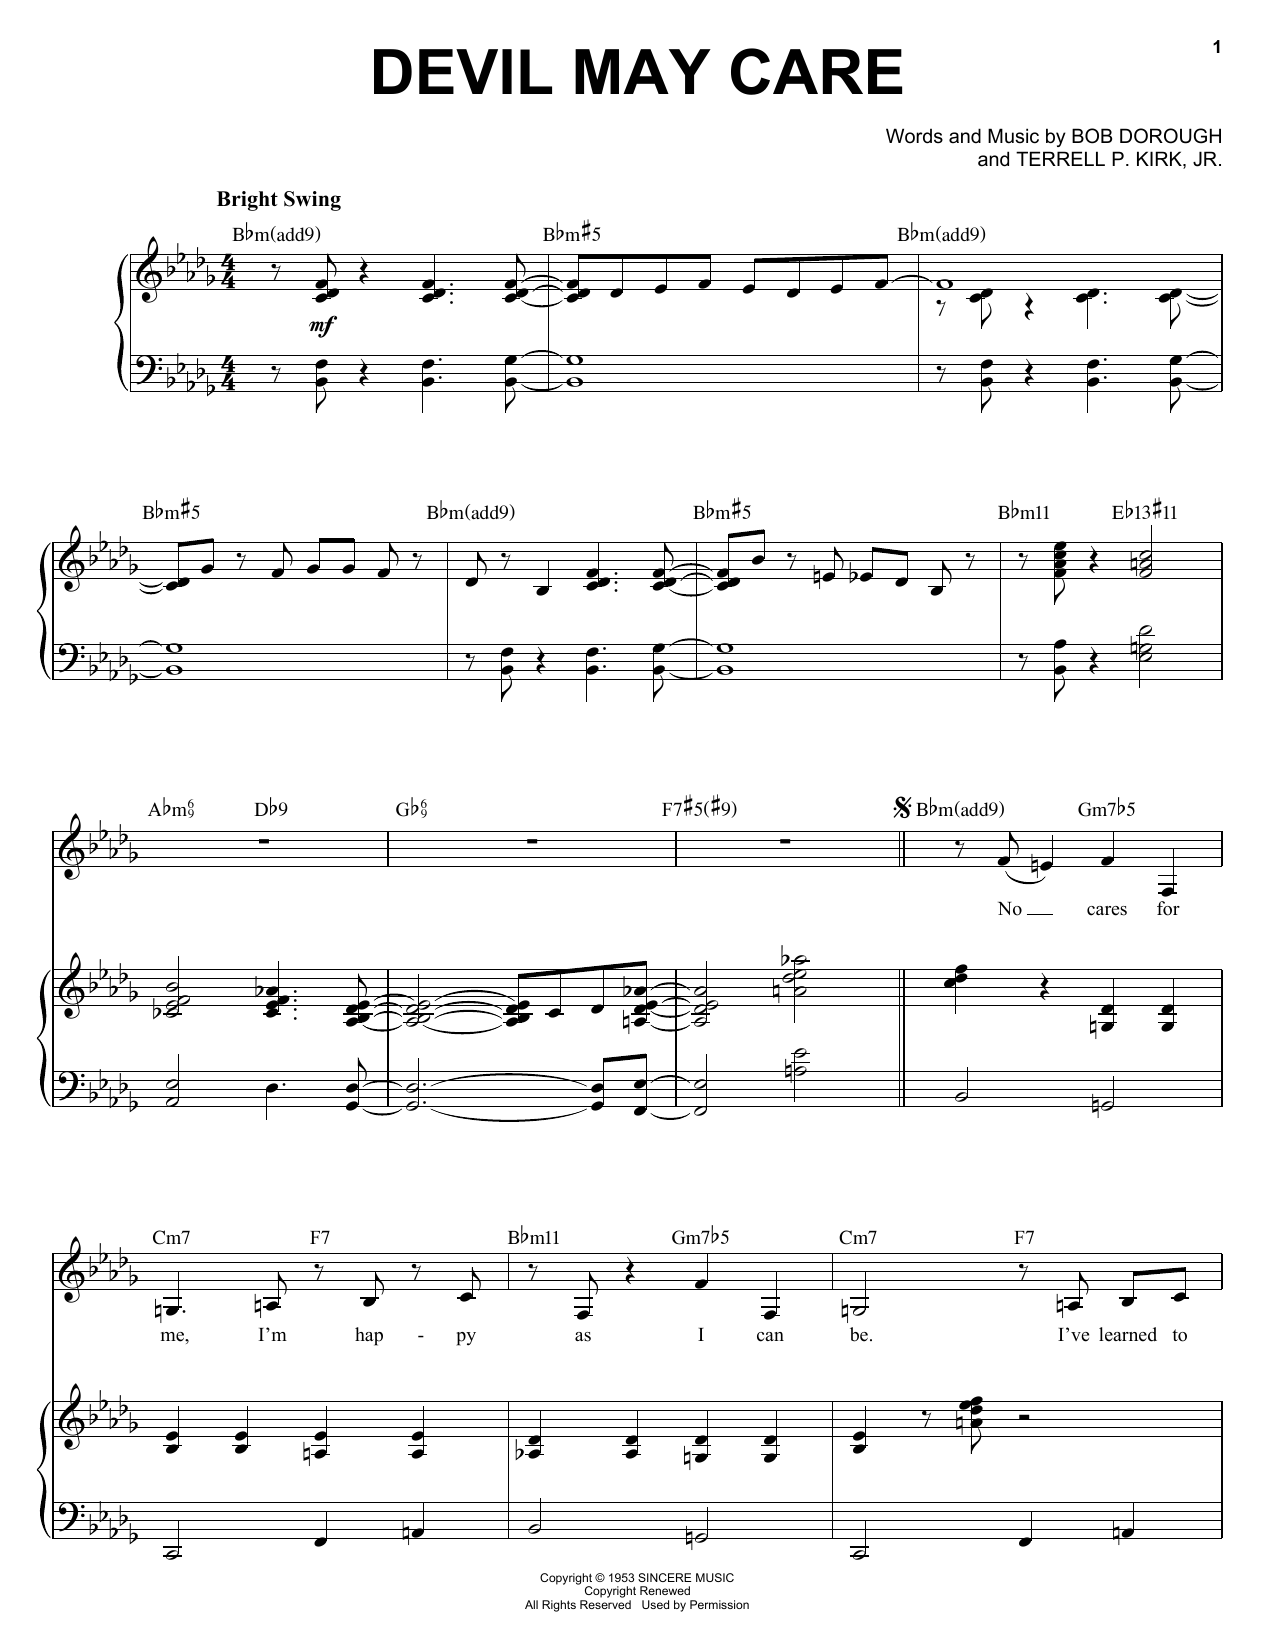 Download Diana Krall Devil May Care Sheet Music